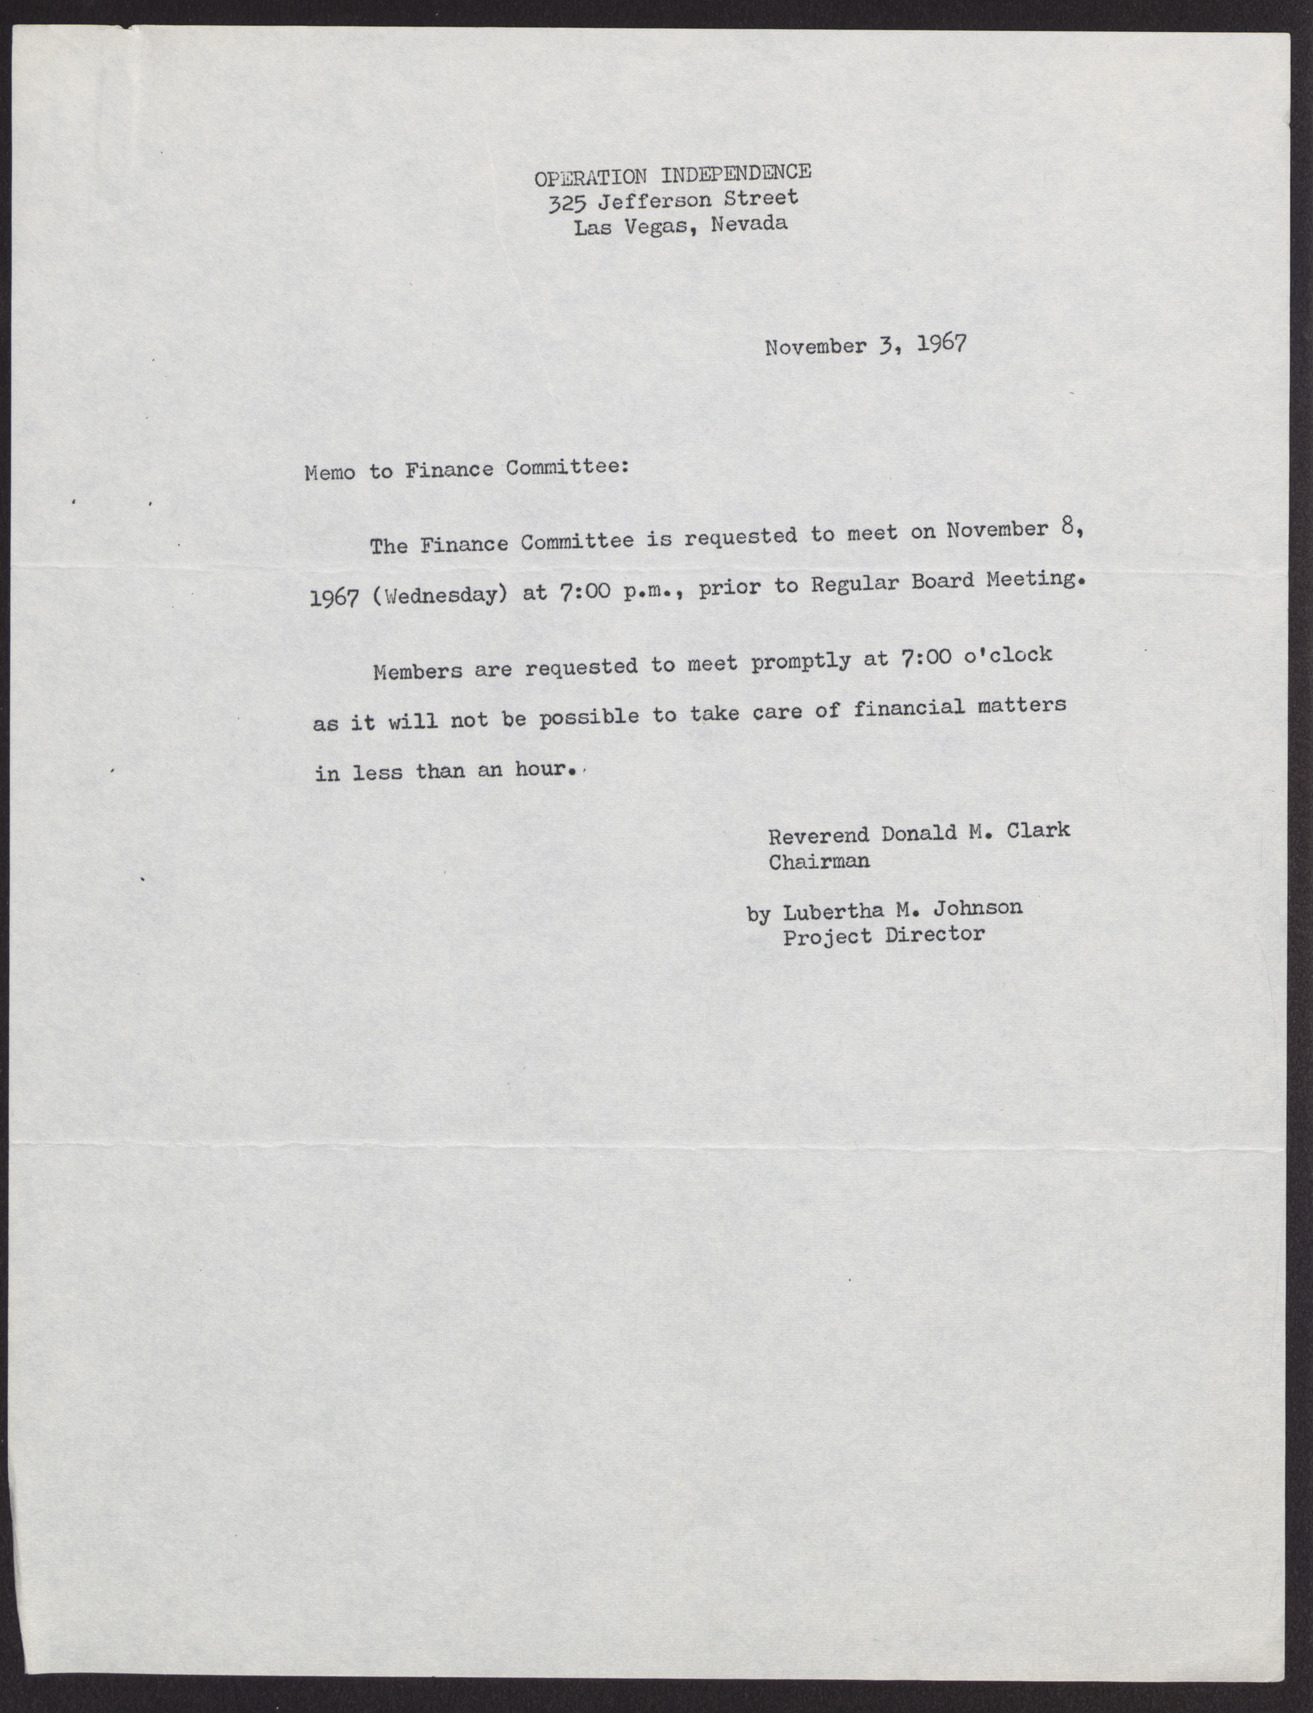 Memo to Operation Independence Finance Committee from Lubertha M. Johnson, November 3, 1967